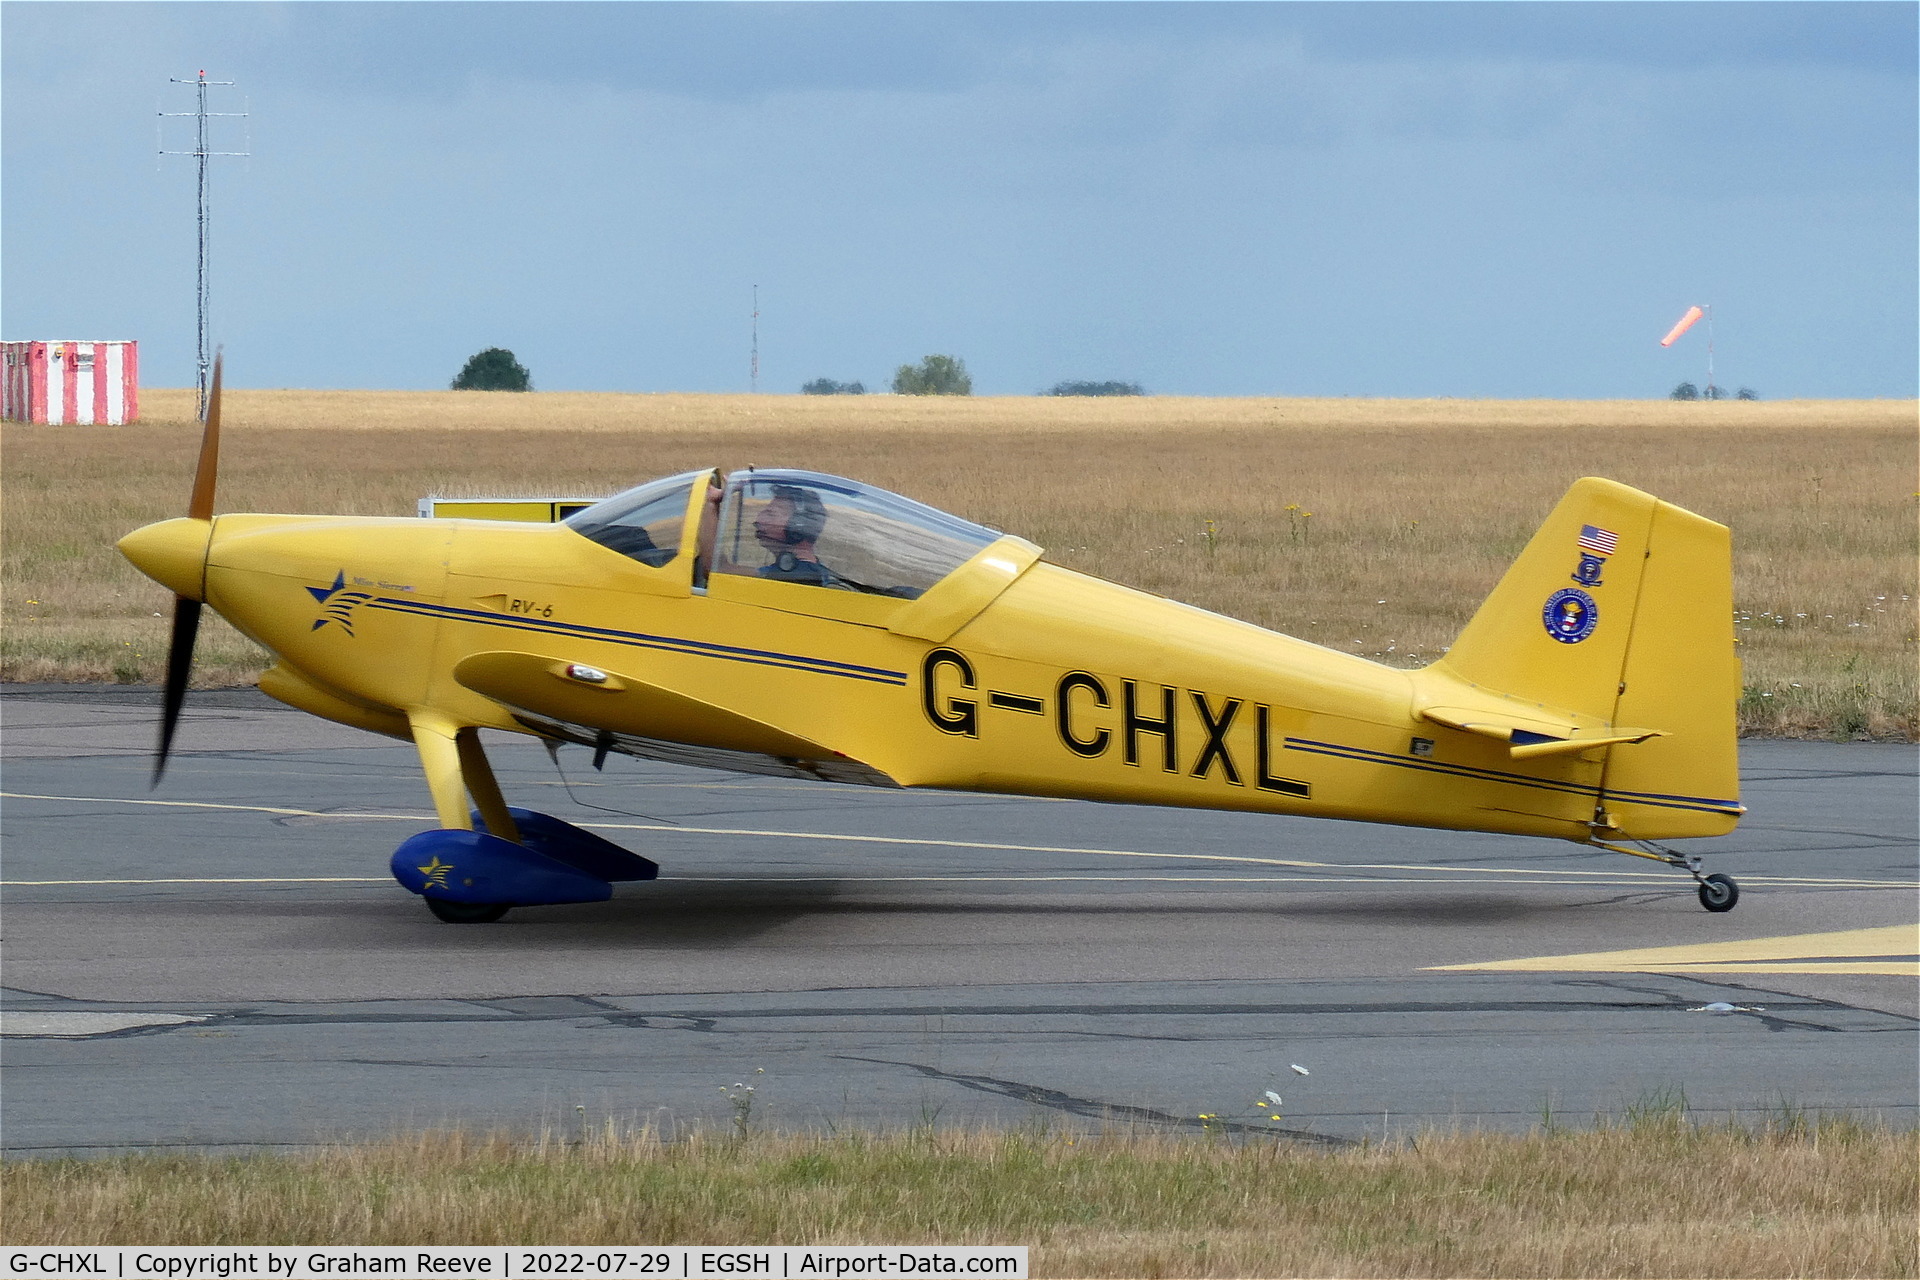 G-CHXL, 1996 Vans RV-6 C/N 20960, Just landed at Norwich.